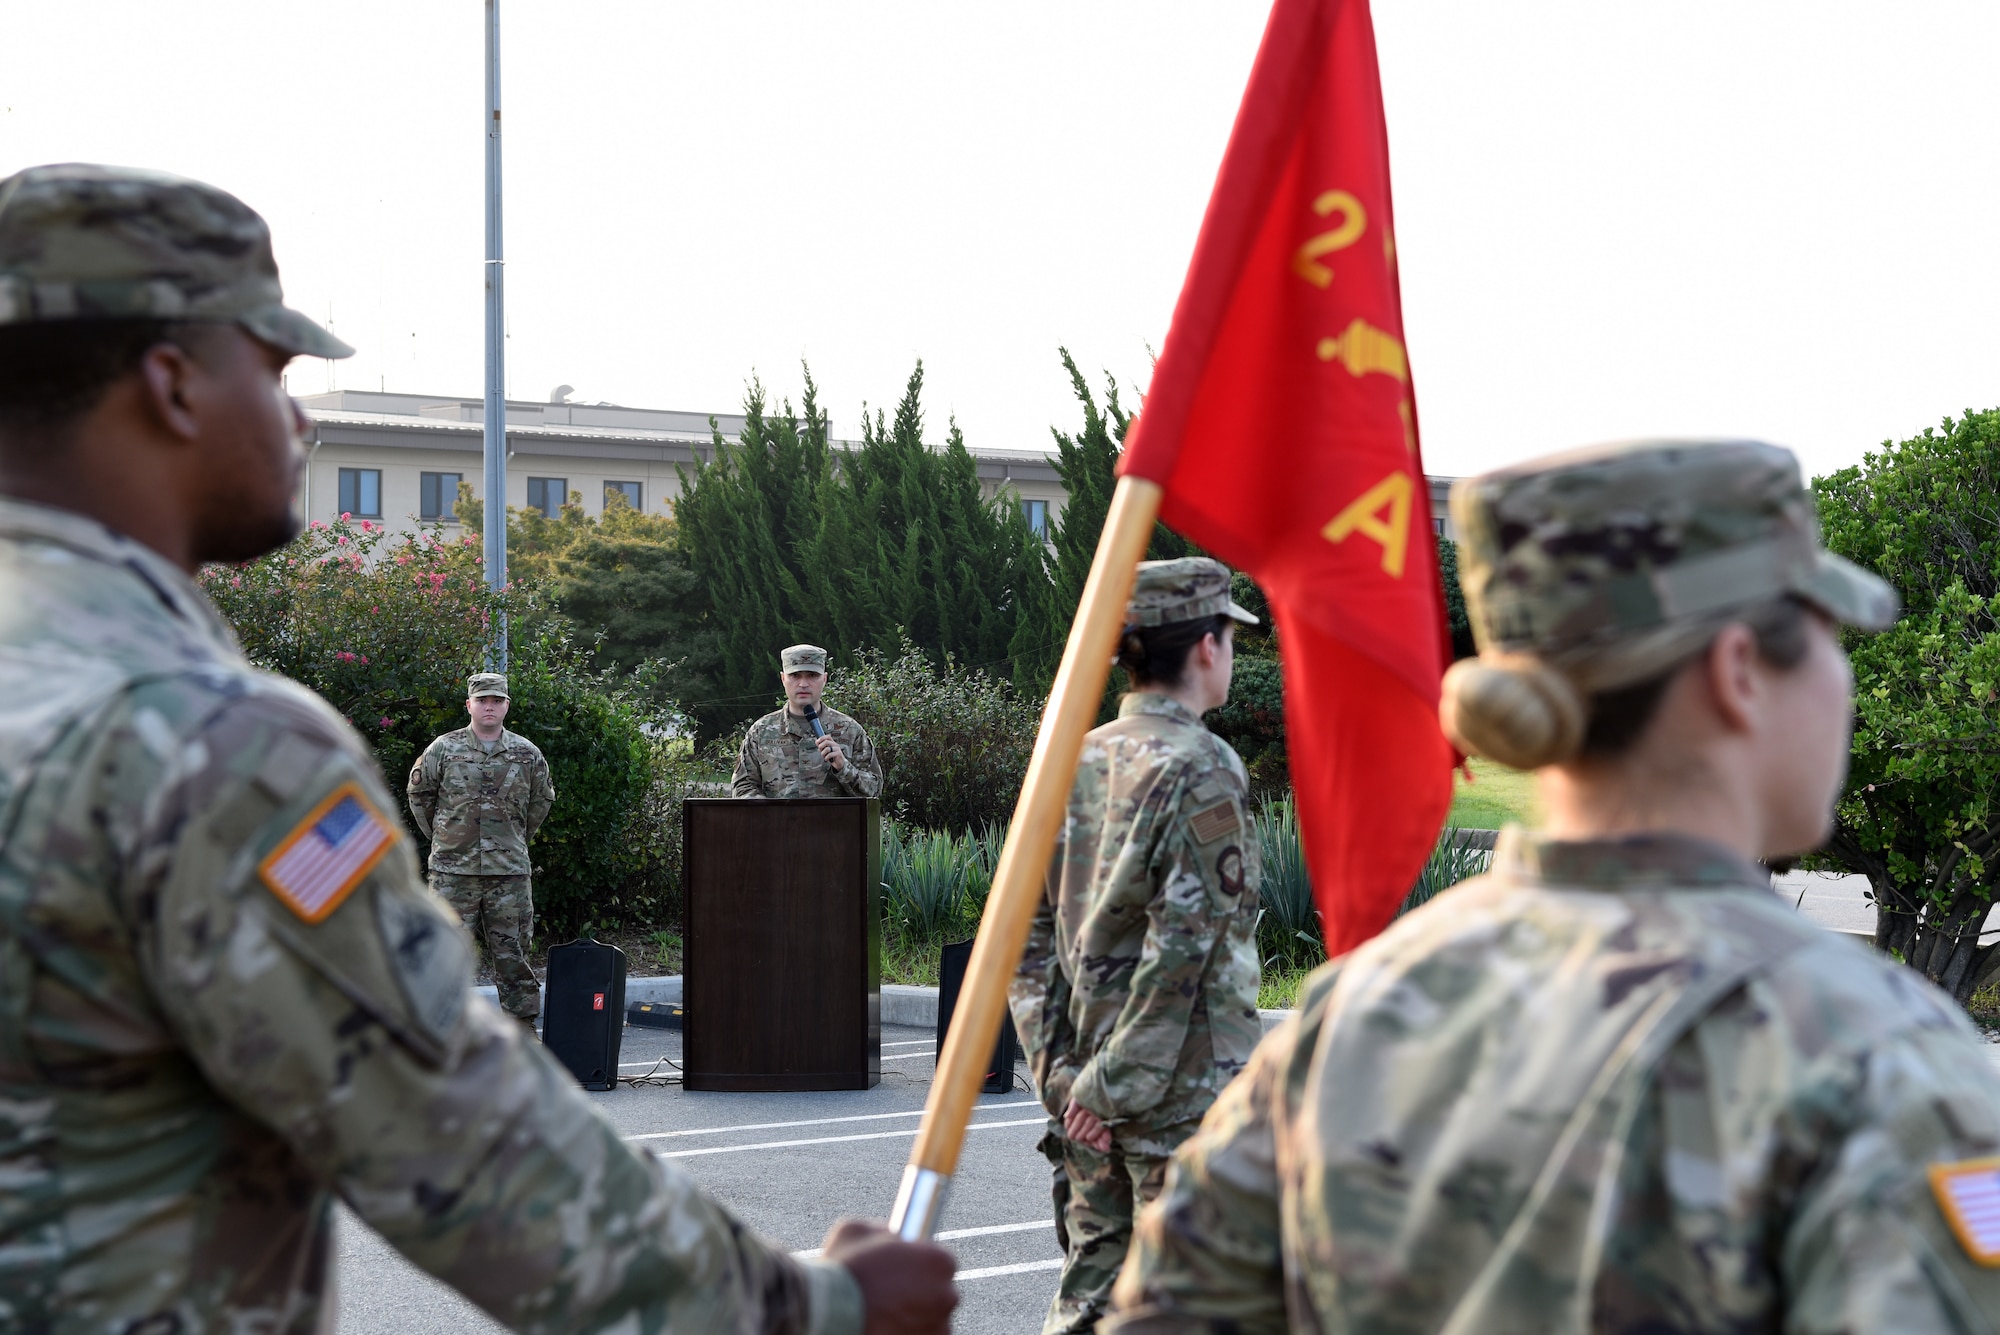 U.S. Air Force Col. Lawrence Sullivan, 8th Fighter Wing vice commander, speaks during the prisoners of war and missing in action opening ceremony at Kunsan Air Base, Republic of Korea, Sept. 16, 2019. The ceremony was the first event in a weeklong remembrance of Airmen, Soldiers, Sailors and Marines who were lost or captured throughout U.S. history. (U.S. Air Force photo by Staff Sgt. Joshua Edwards)